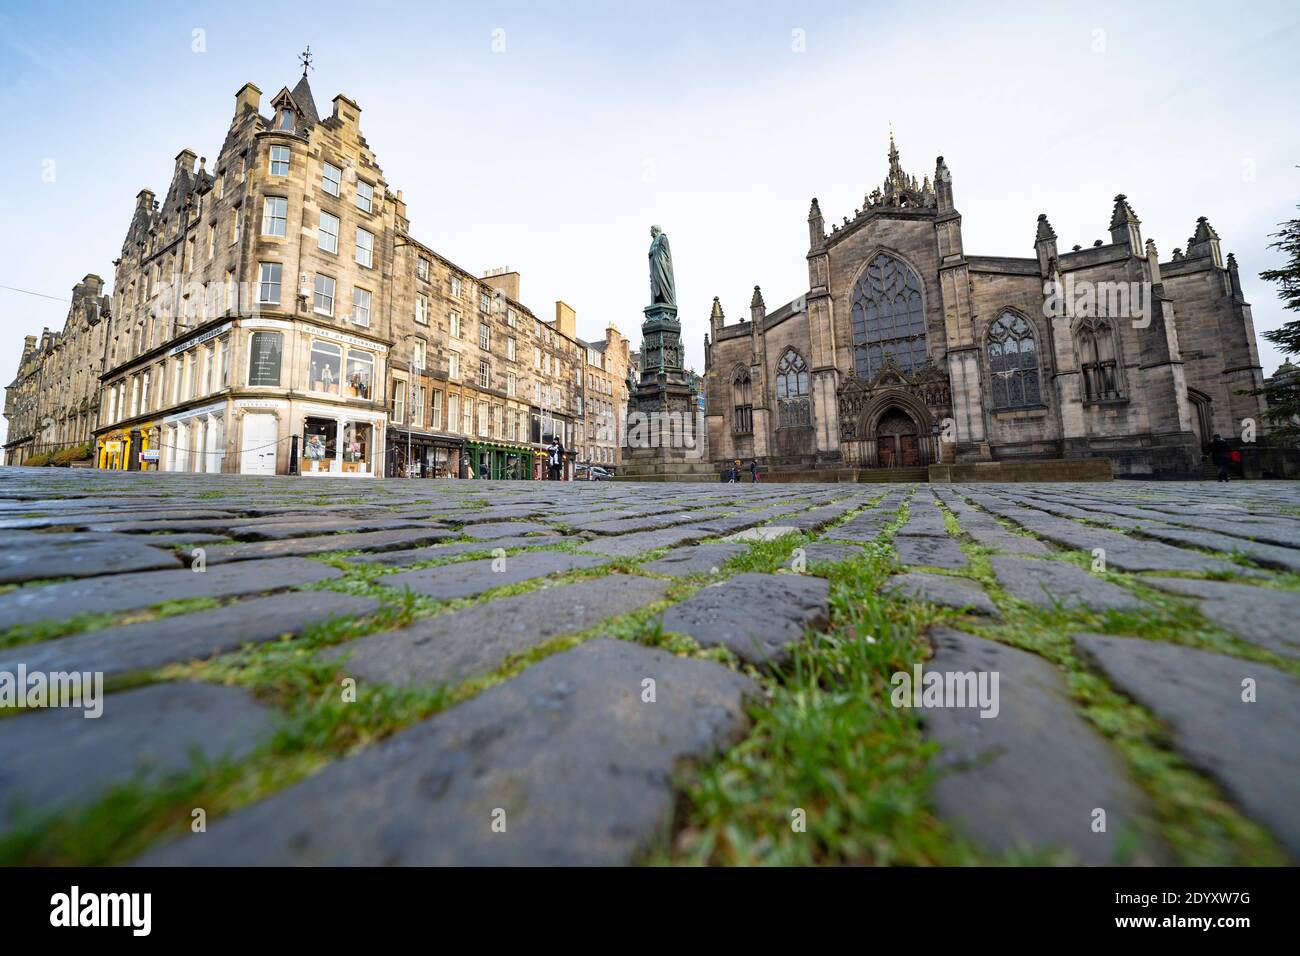 Edinburgh, Scotland, UK. 28 December 2020. Scenes from Edinburgh City Centre as Scotland starts first weekday under the most severe level 4 lockdown with all non-essential businesses closed. Pic; The Royal Mile and parliament Square at St Giles is very quiet with very few tourists. Iain Masterton/Alamy Live News Stock Photo